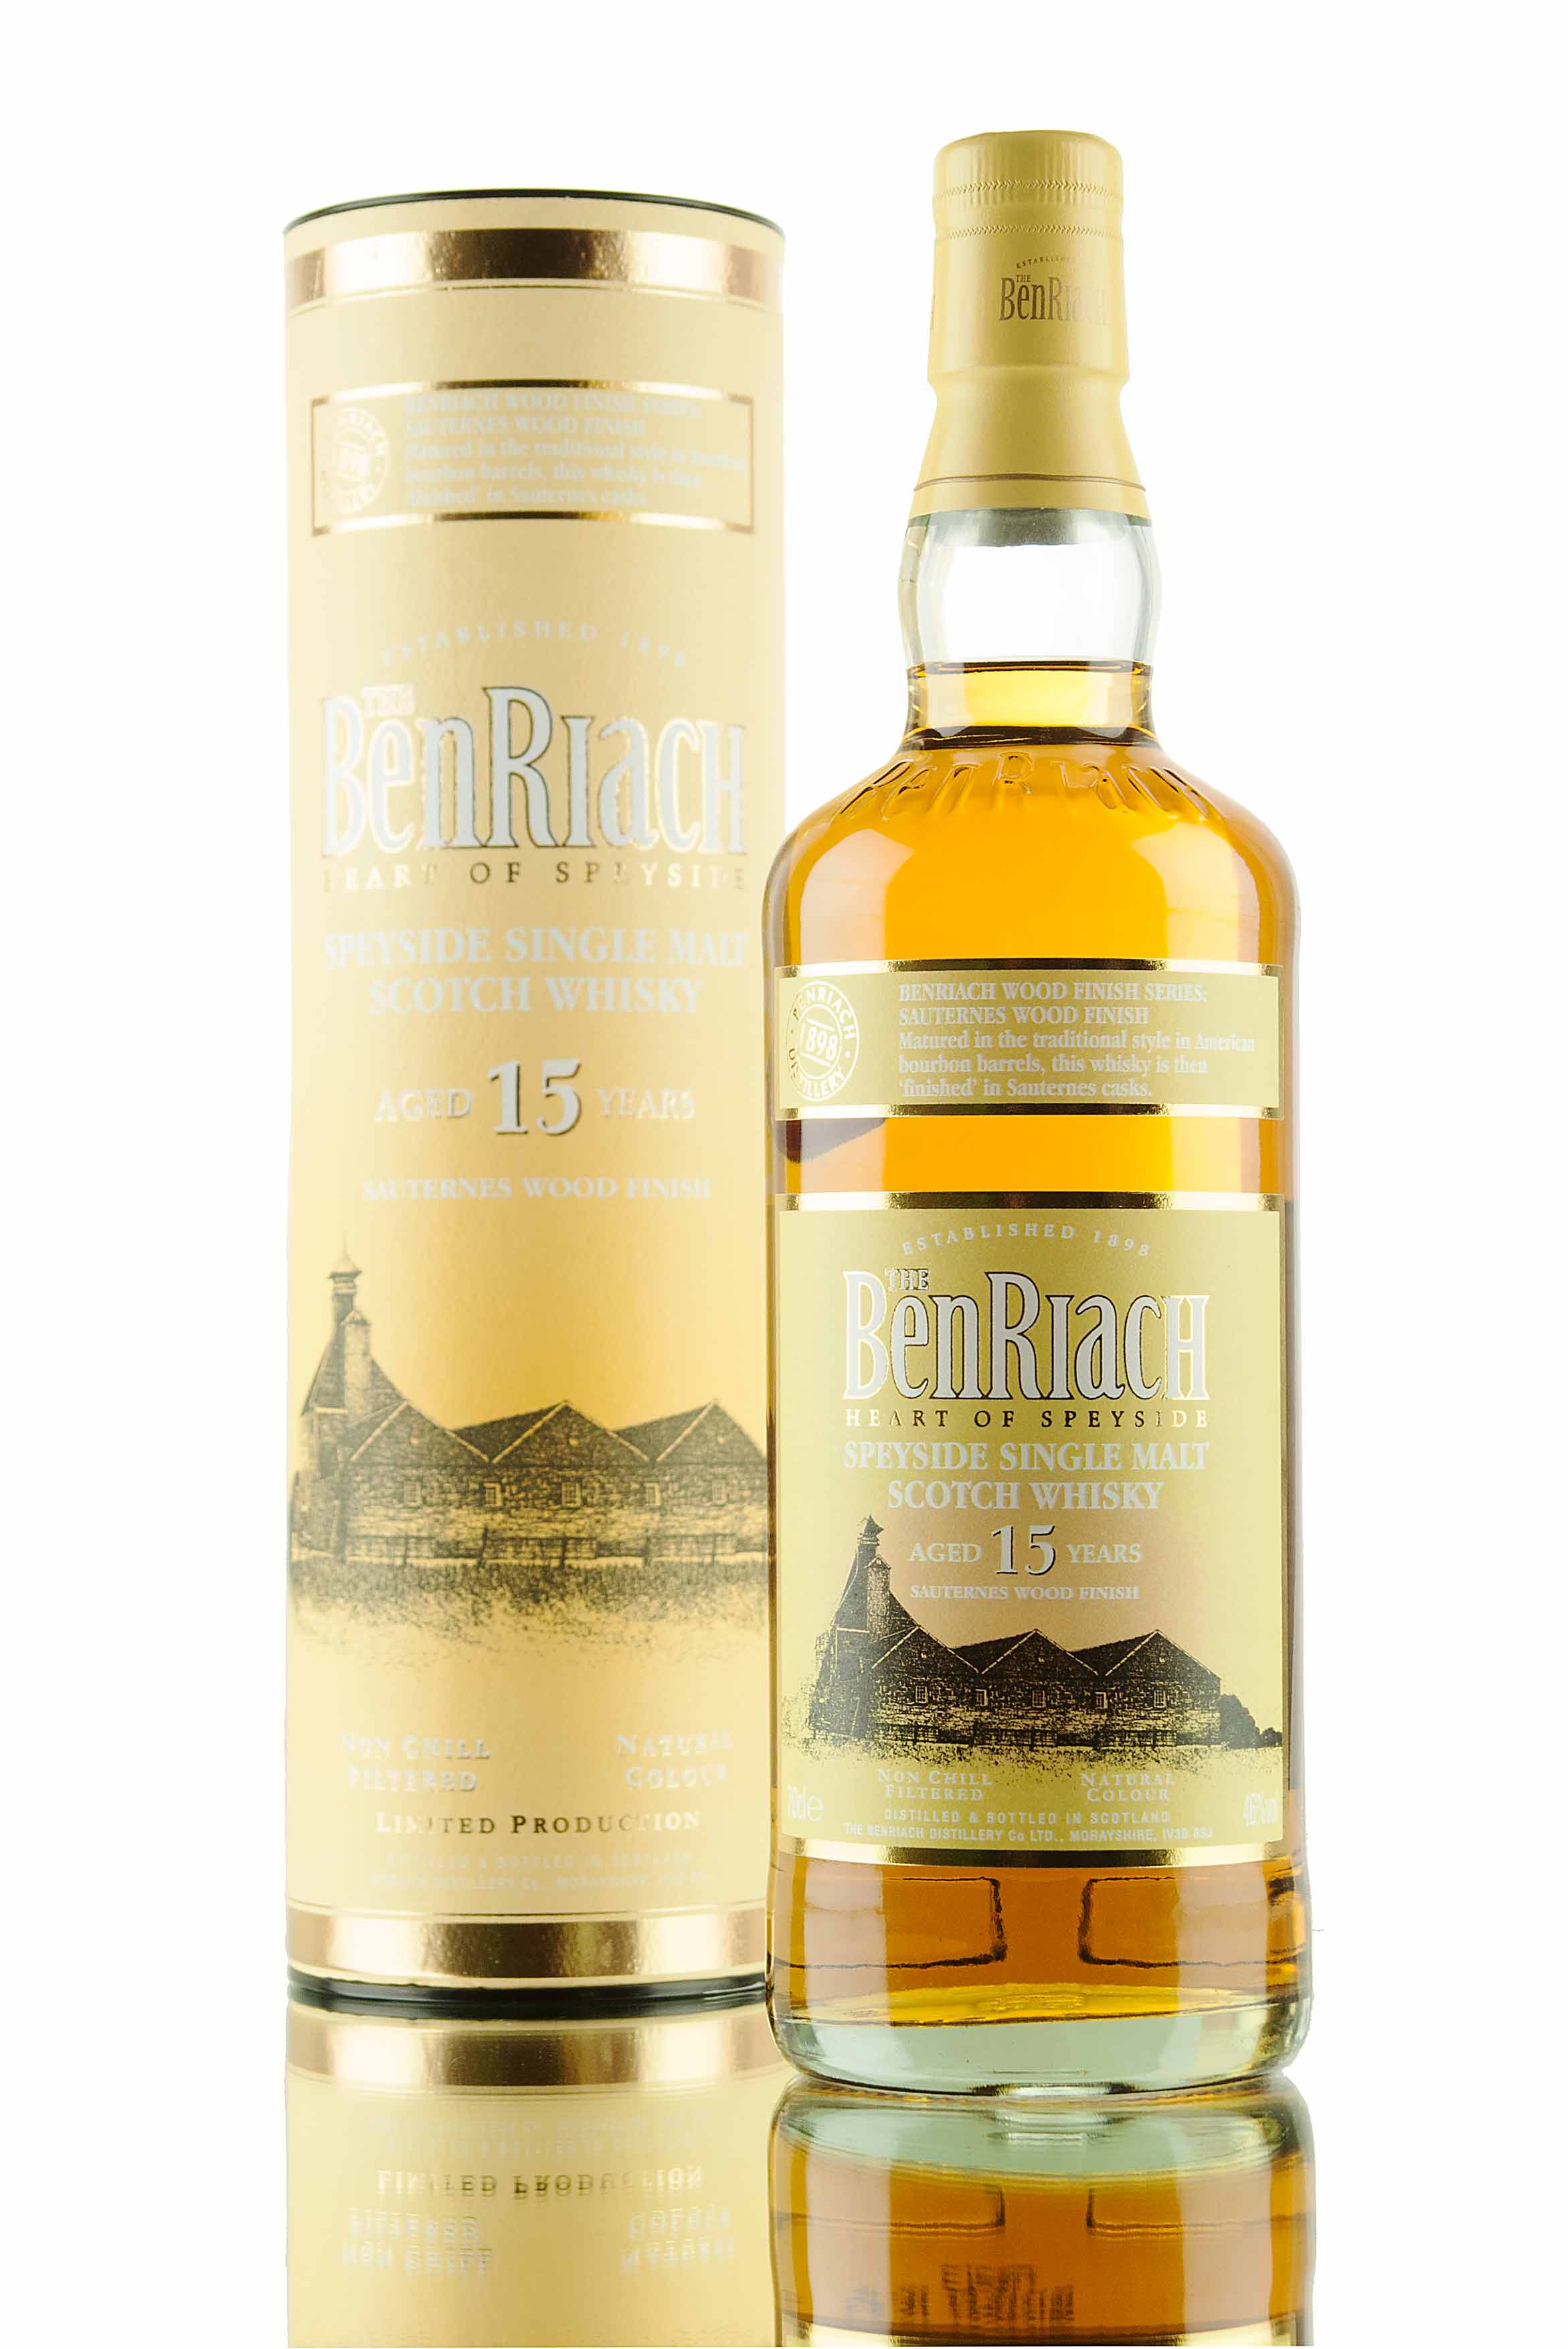 BenRiach 15 Year Old / Sauternes Wood Finish